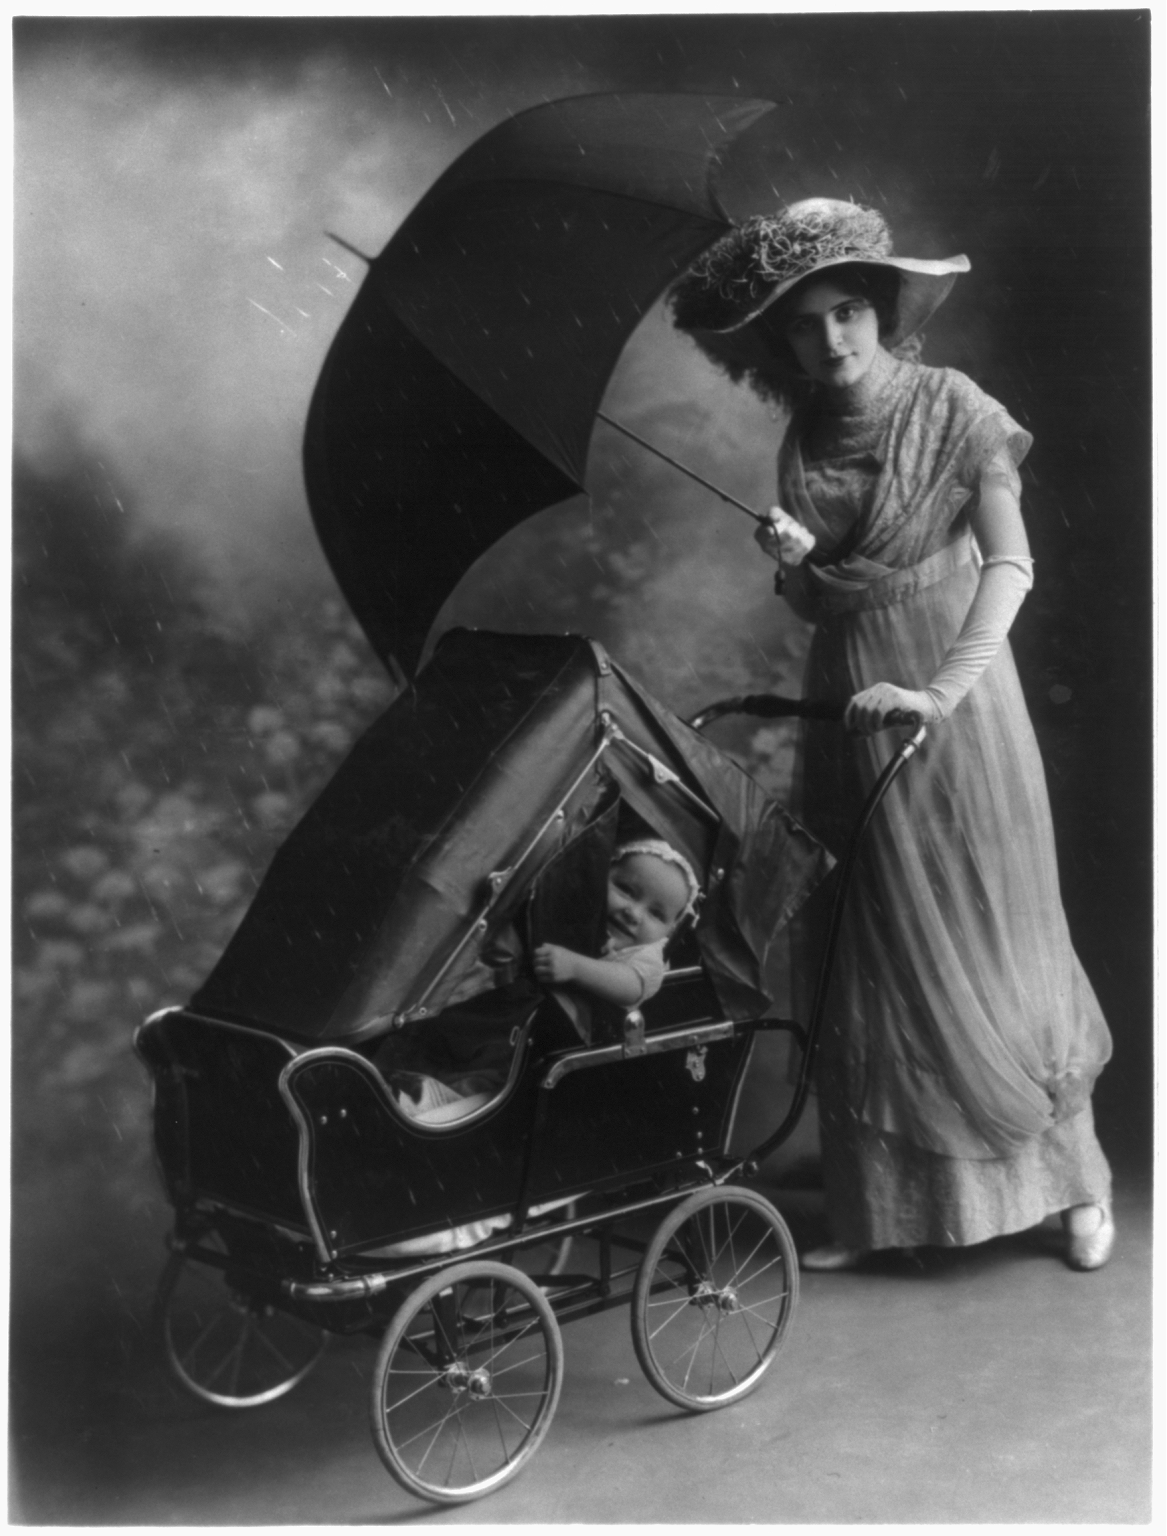 1800 baby strollers